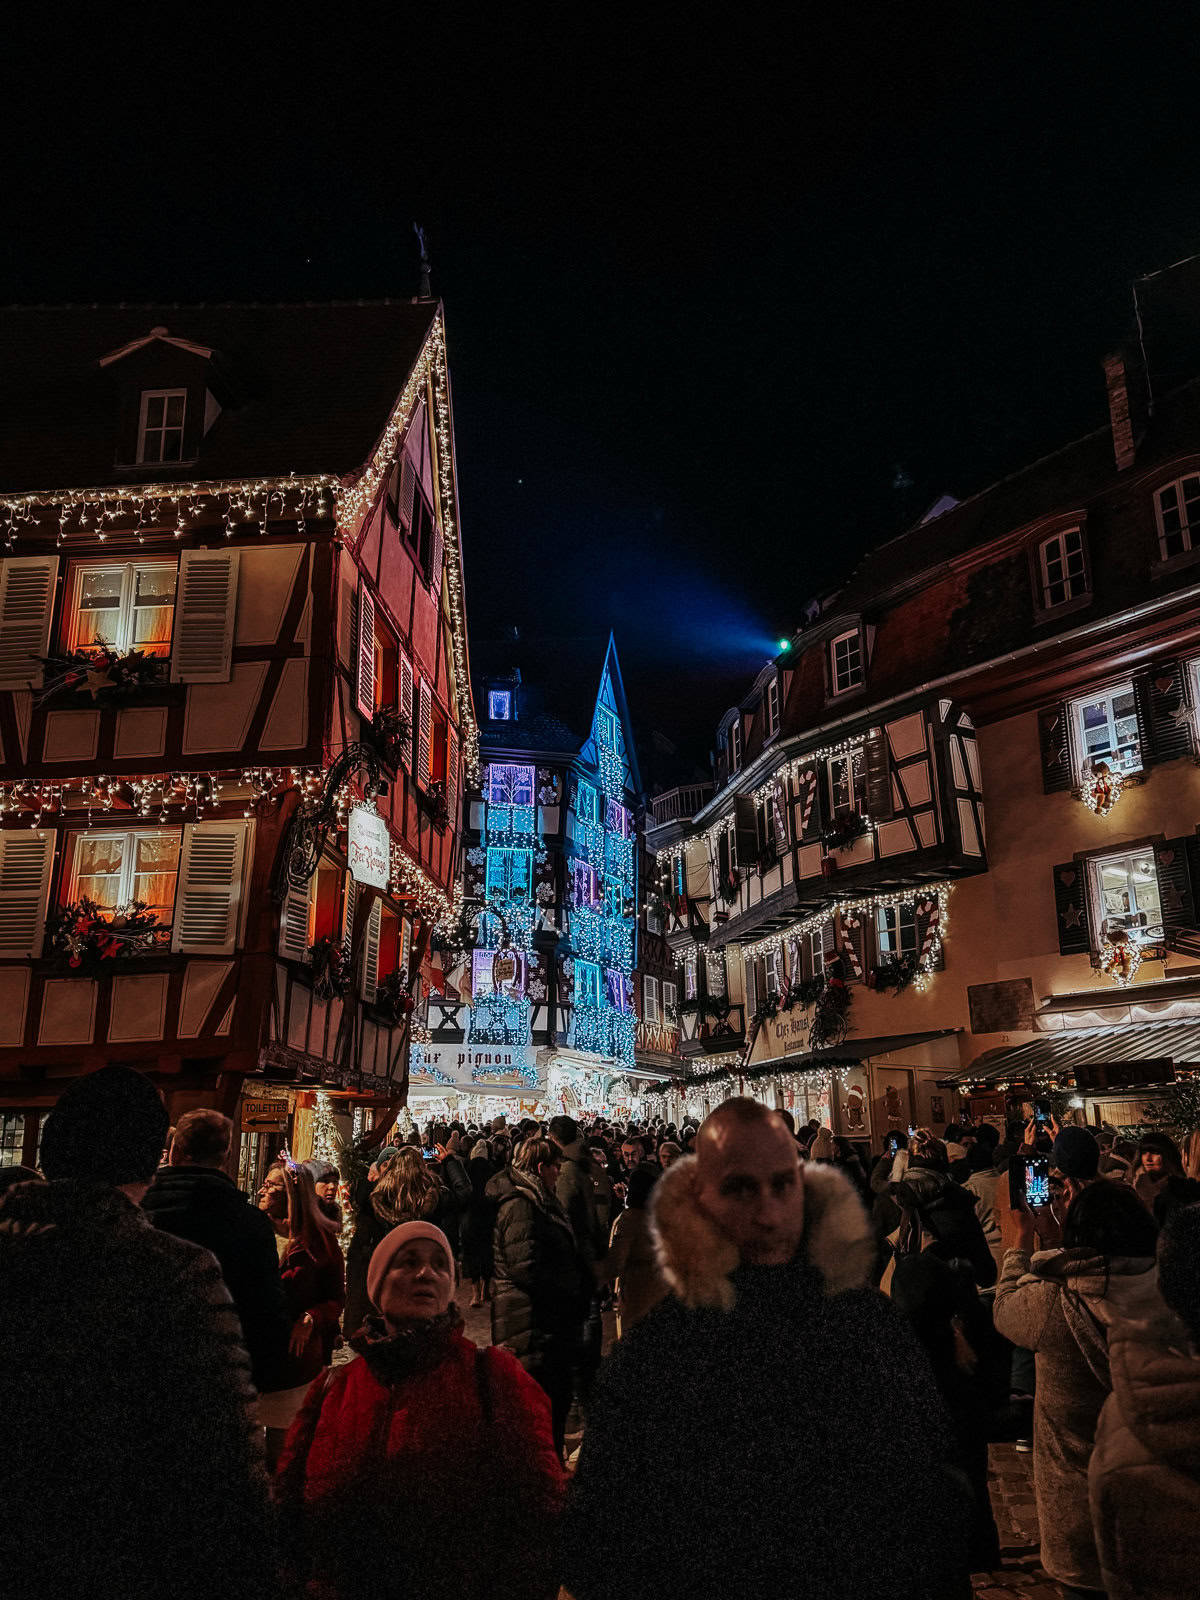 Millions of people crowded at the Colmar Christmas Market